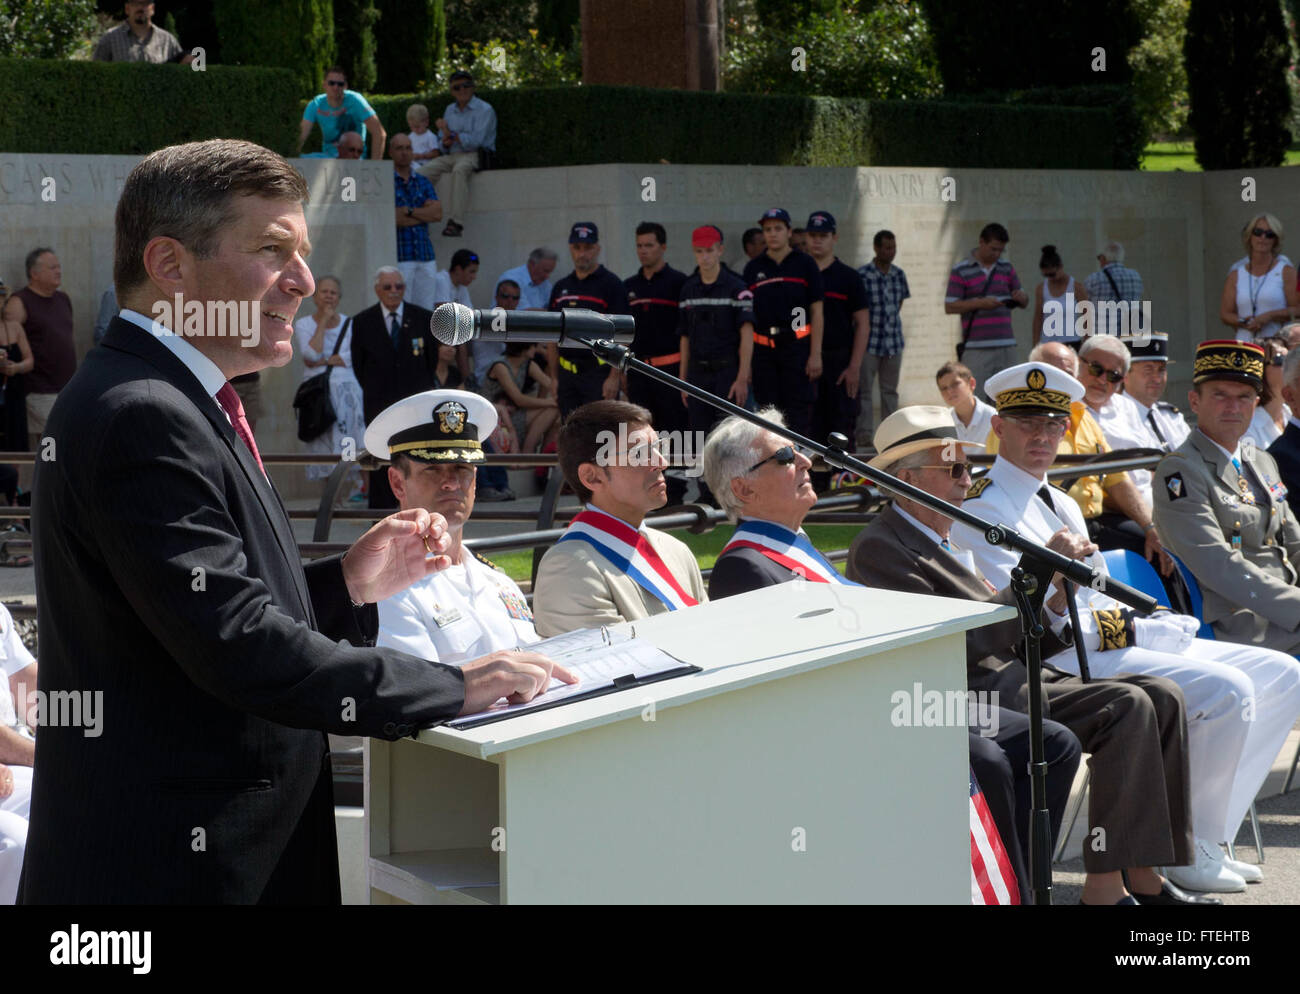 DRAGUIGNAN, France (August 16, 2013) – Charles Rivkin, left, United States Ambassador to France and Monaco, makes remarks during a ceremony at the Rhone American Cemetery in honor of the 69th anniversary celebration of allied troops landing in Provence during World War II. This visit serves to continue U.S. 6th Fleet efforts to build global maritime partnerships with European nations and improve maritime safety and security. Stock Photo